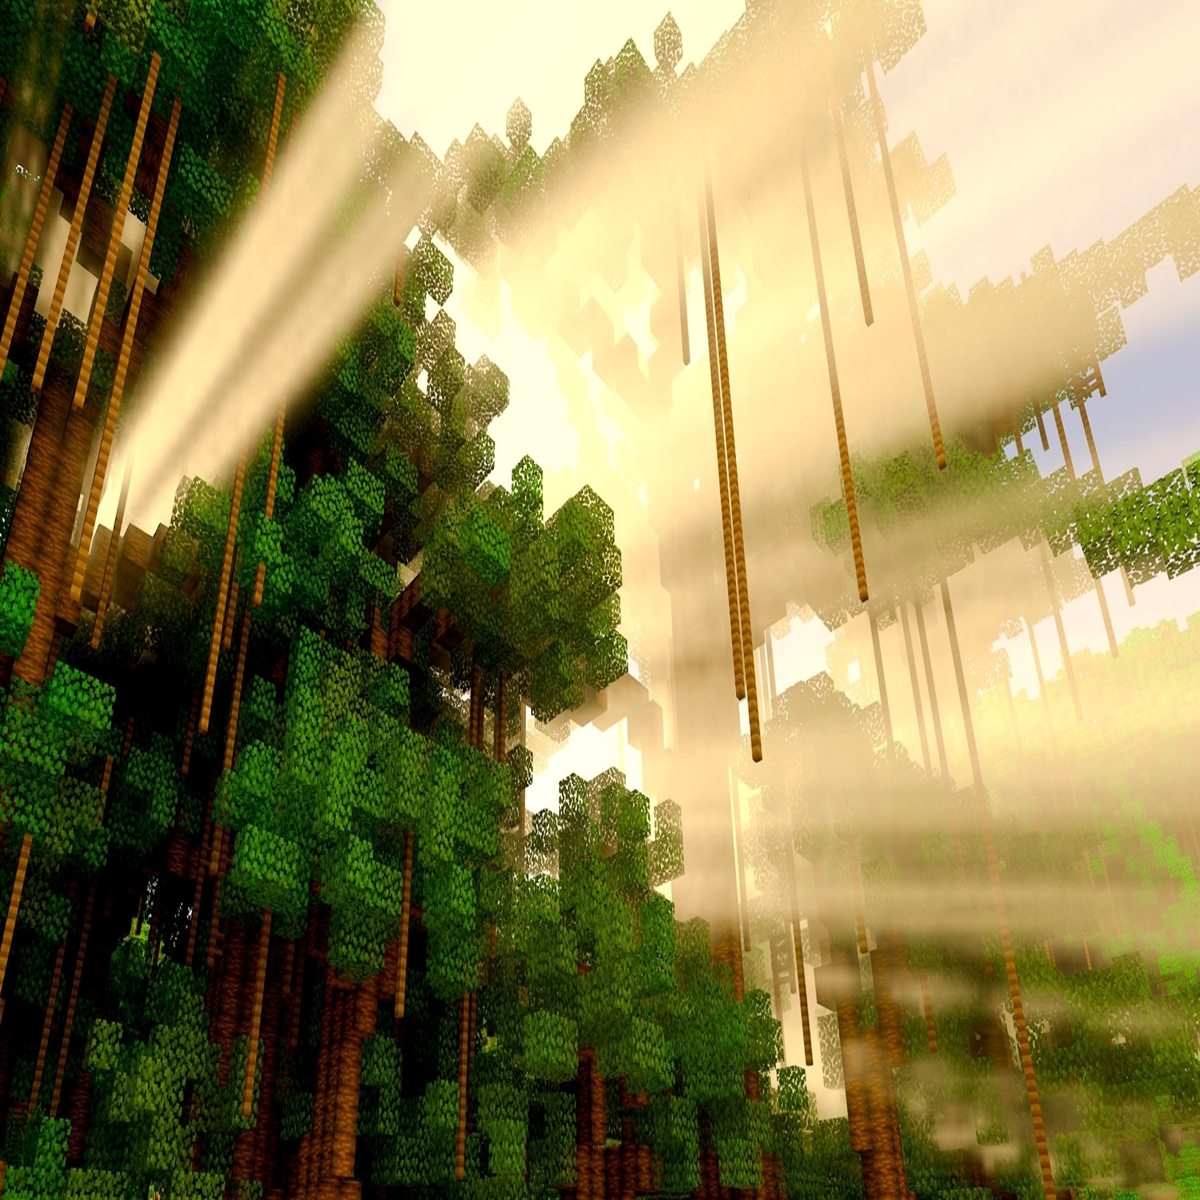 RTX On: Minecraft's gorgeous real-time ray tracing is coming this